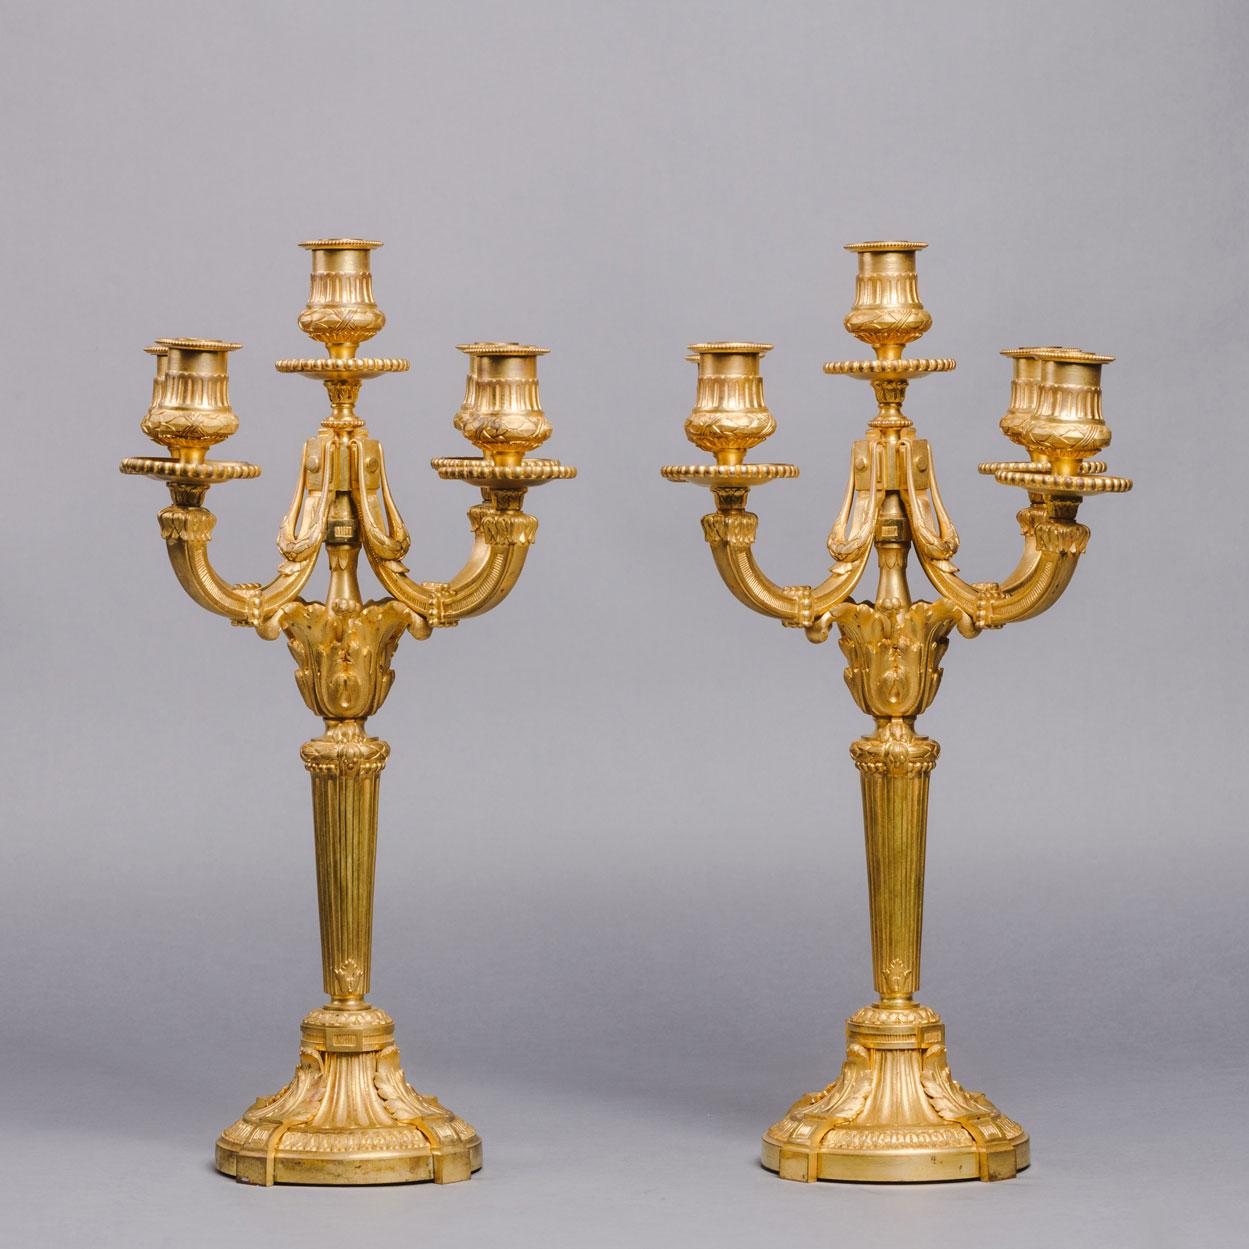 A Pair Of Louis XVI Style Gilt-Bronze Five-Light Candelabra Or Table Lamps
By Jollet Et Cie, Paris

Each with fluted stem supporting central light and issuing four swept branches. Presently not wired for electricity, they can be wired upon